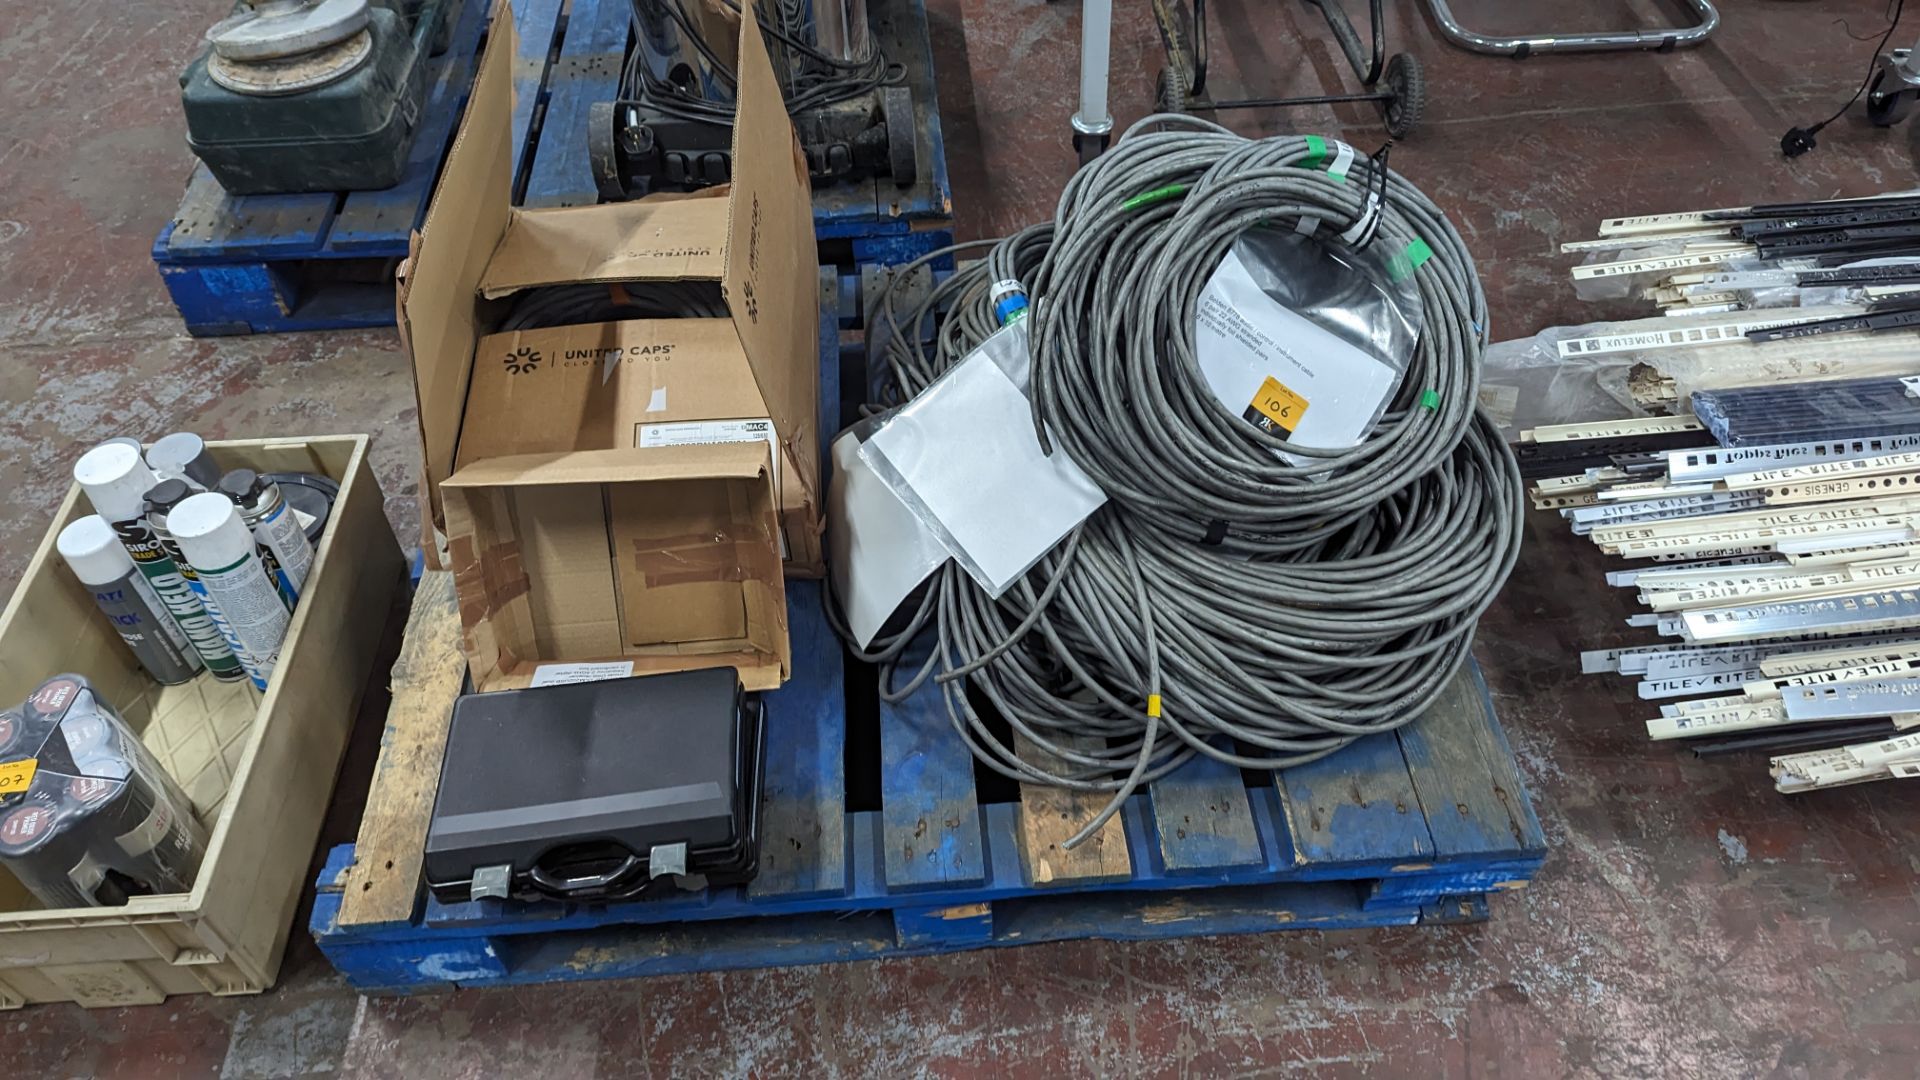 The contents of a pallet of assorted professional audio cable and a pair of Beringer hand held wirel